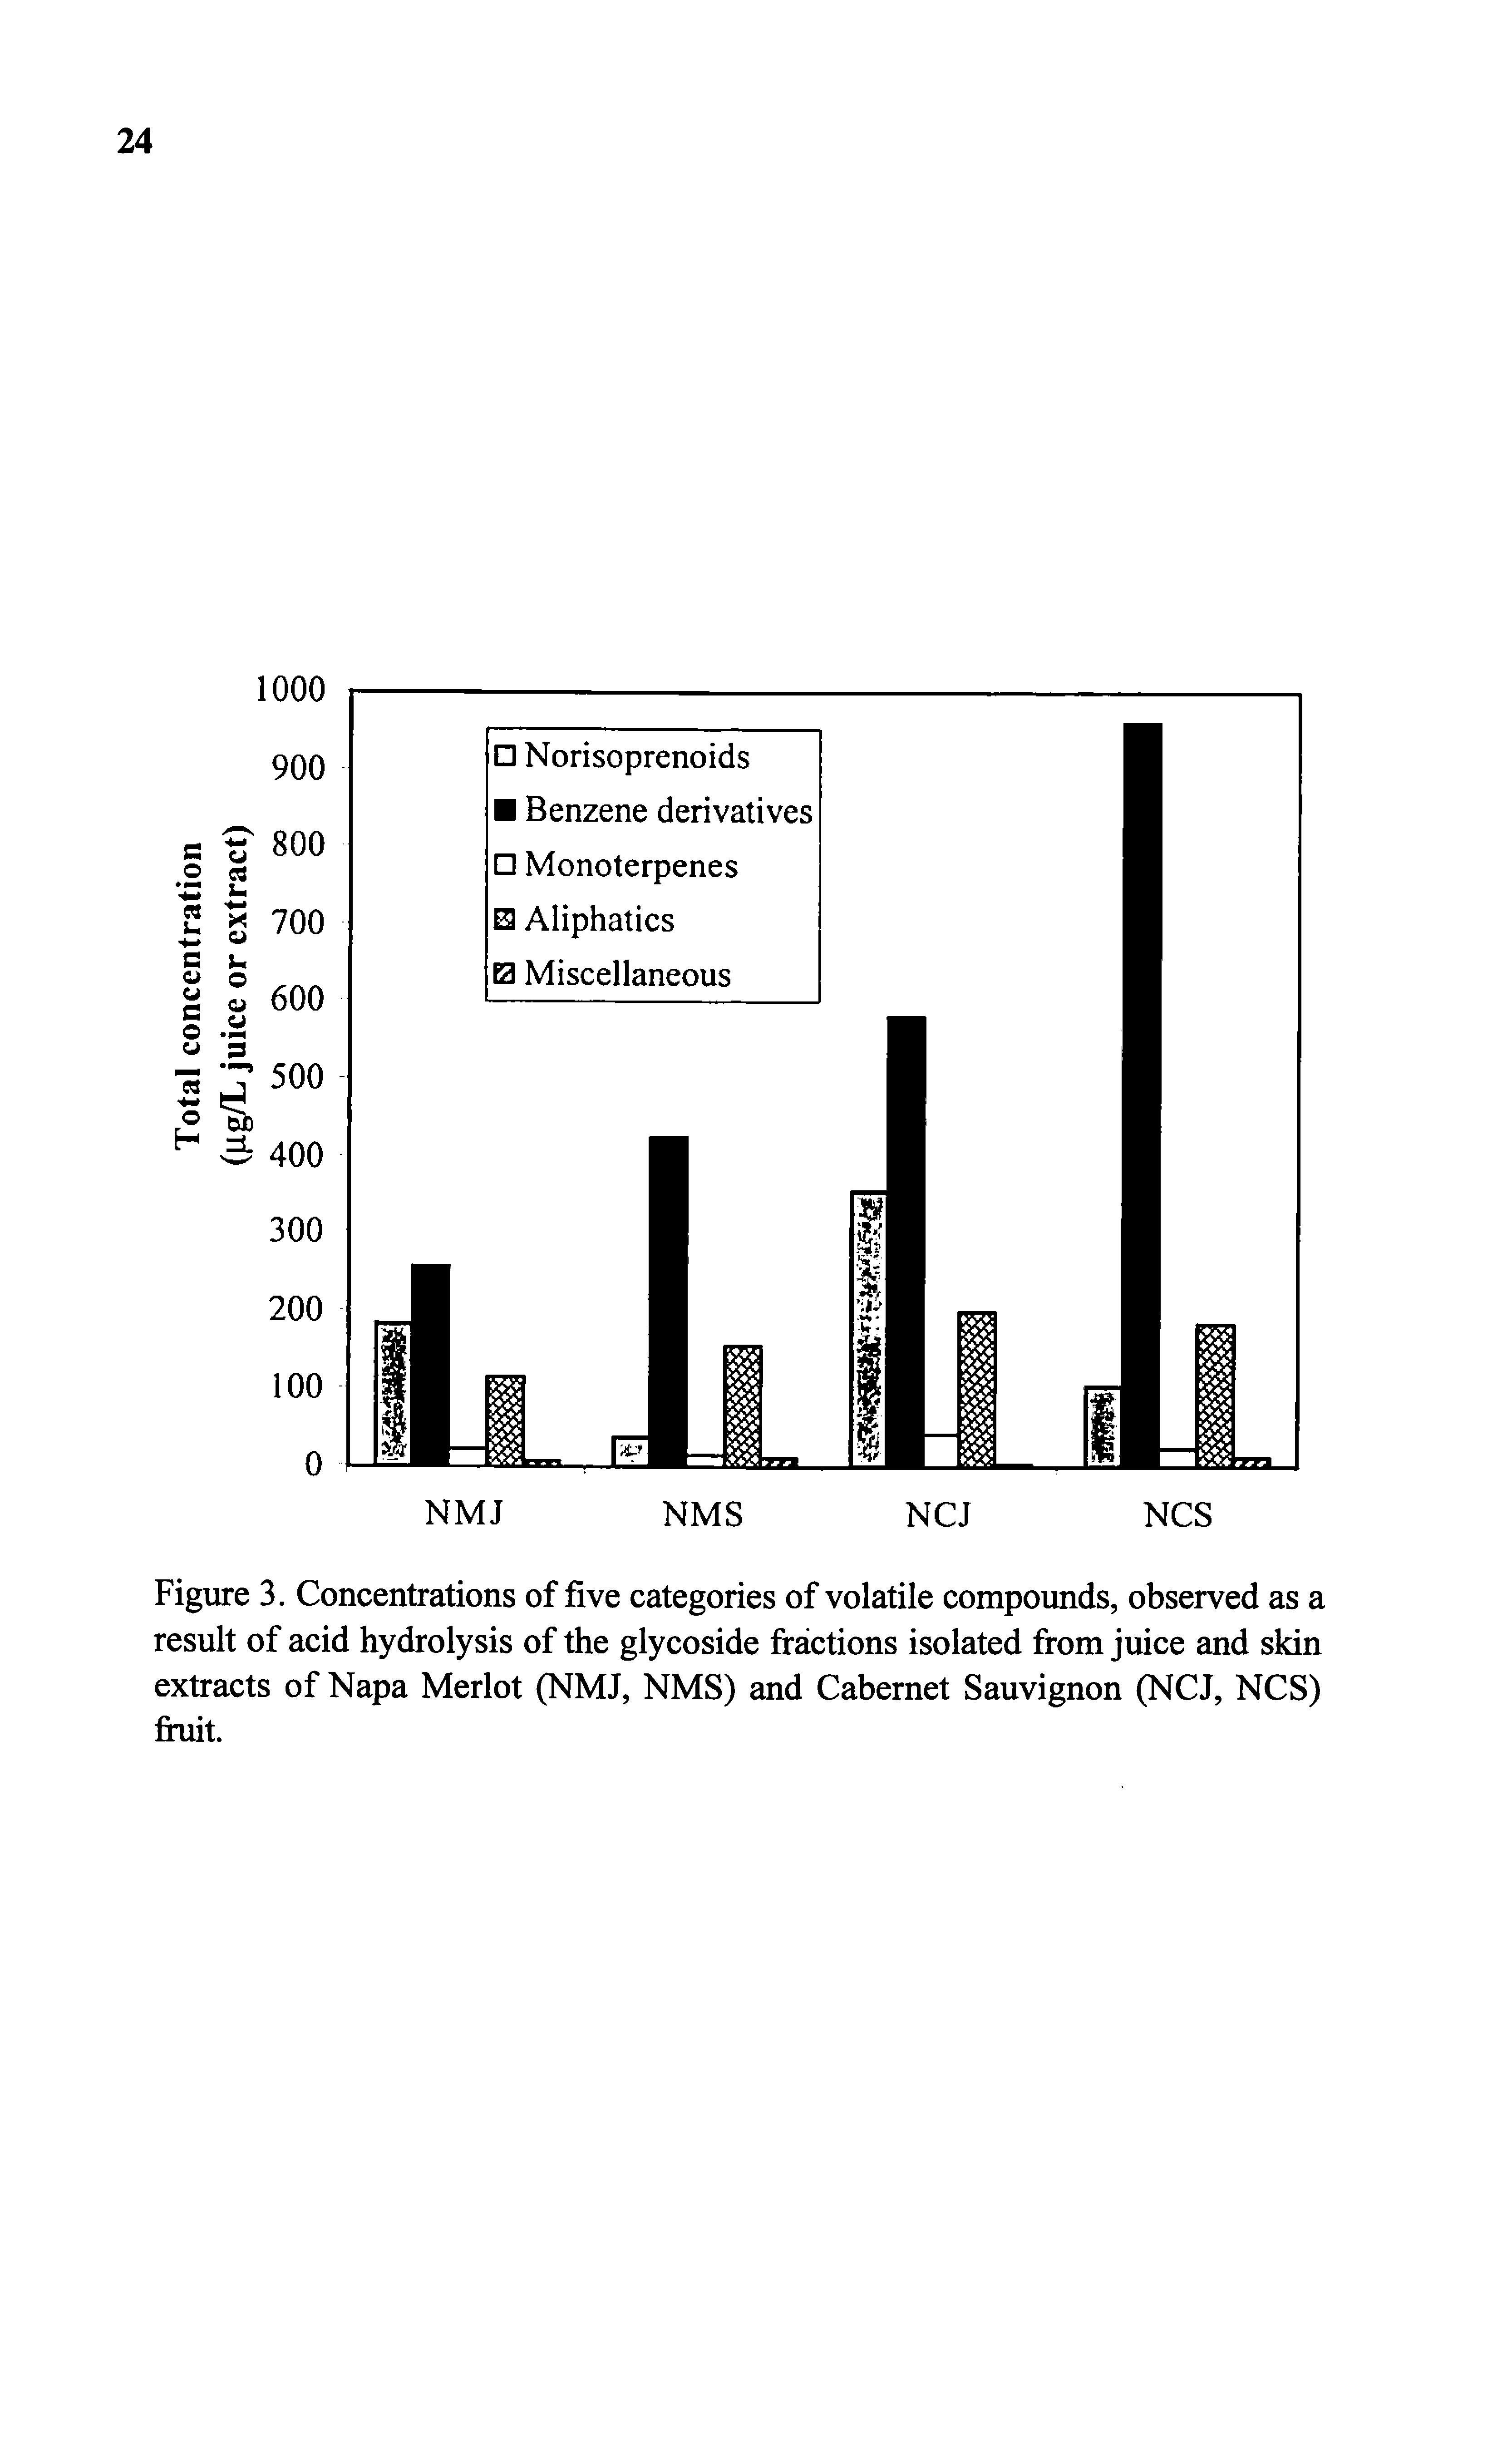 Figure 3. Concentrations of five categories of volatile compounds, observed as a result of acid hydrolysis of the glycoside fractions isolated from juice and skin extracts of Napa Merlot (NMJ, NMS) and Cabernet Sauvignon (NCJ, NCS) fruit.